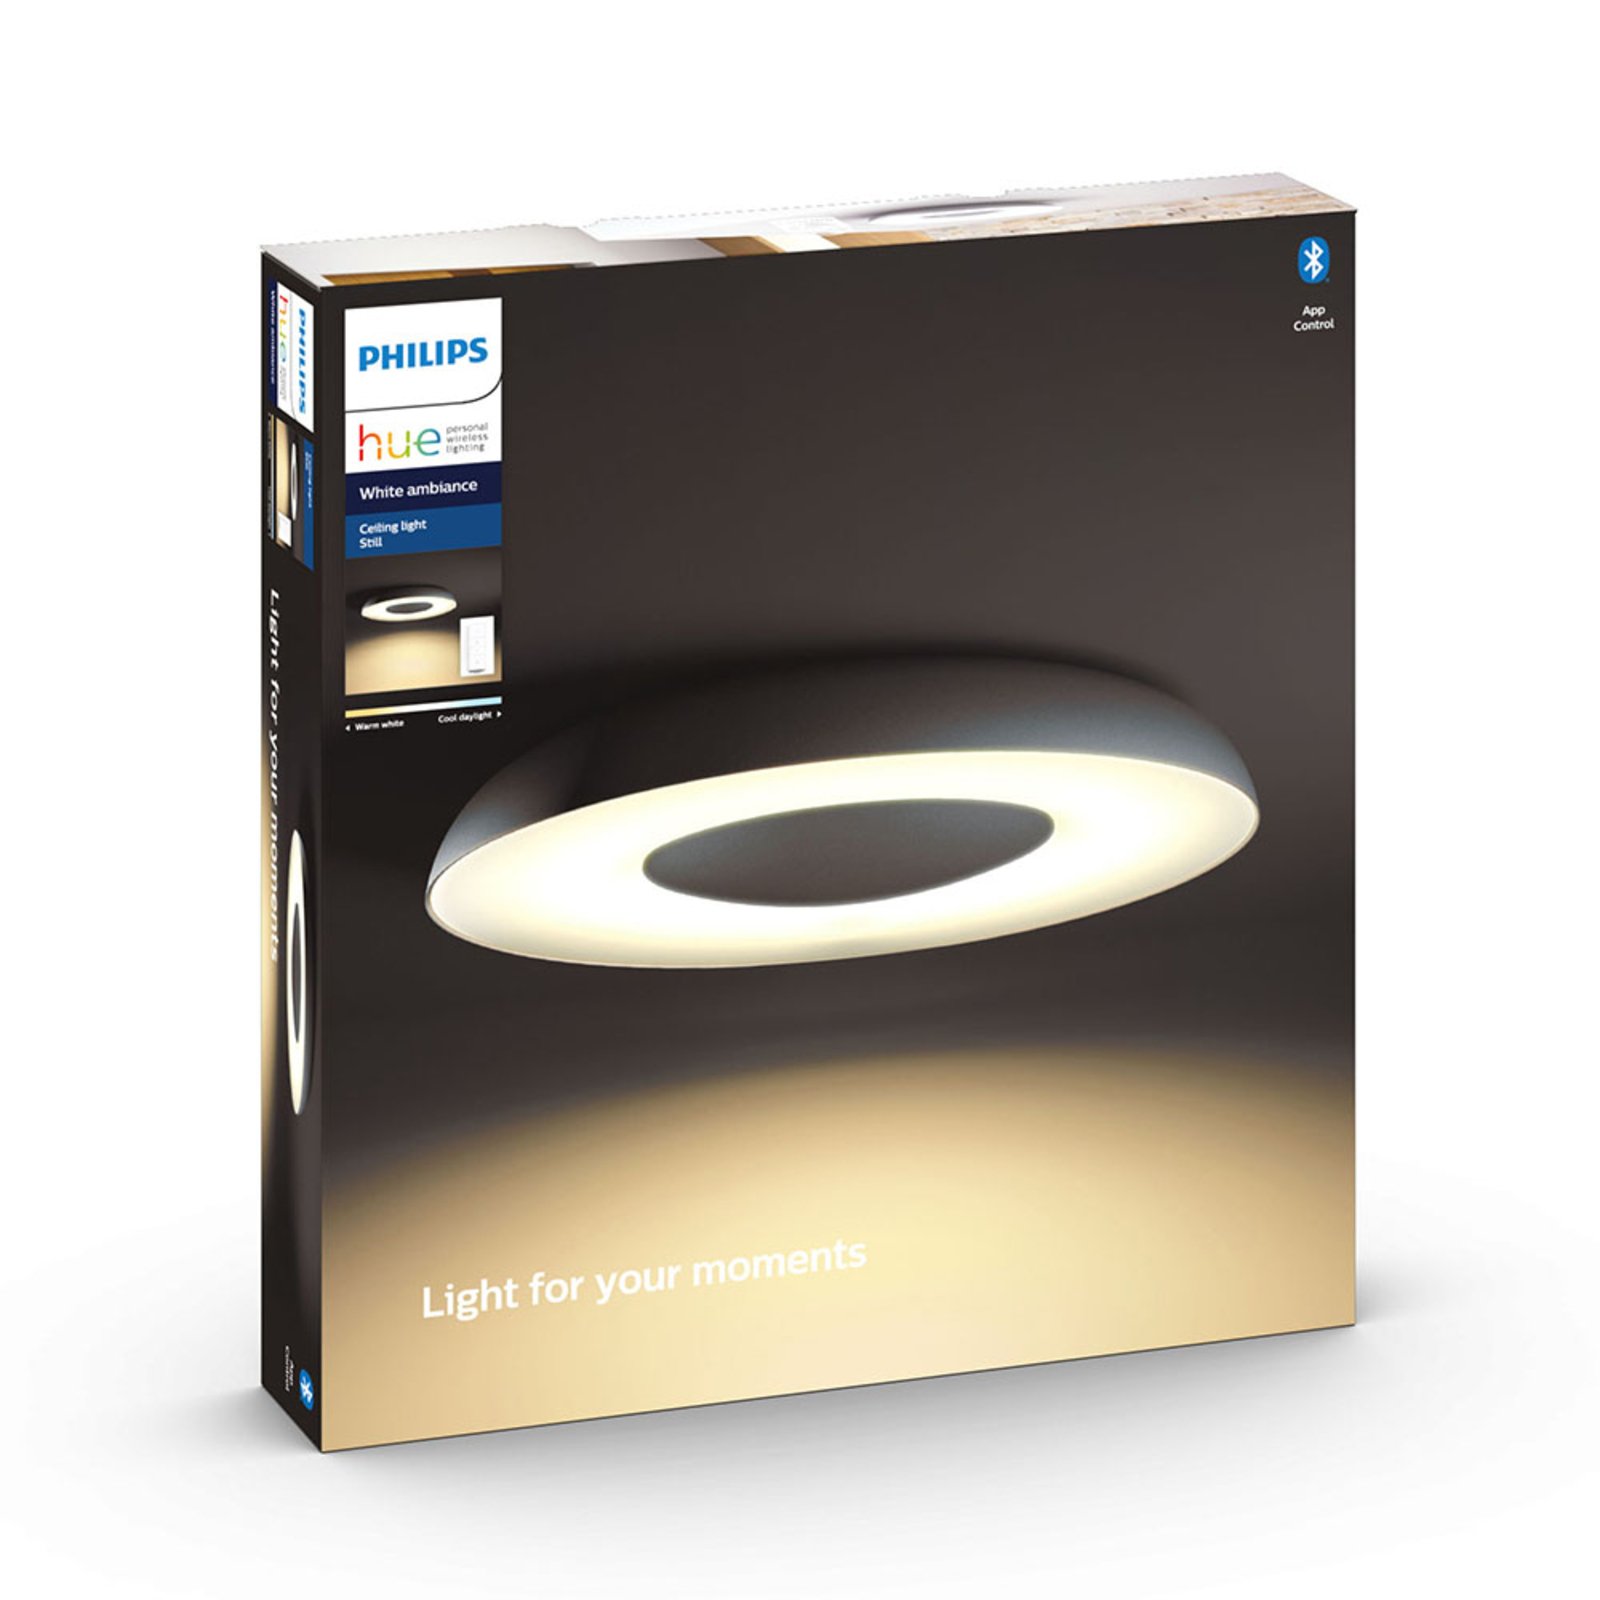 Philips Hue White Ambiance Still, must